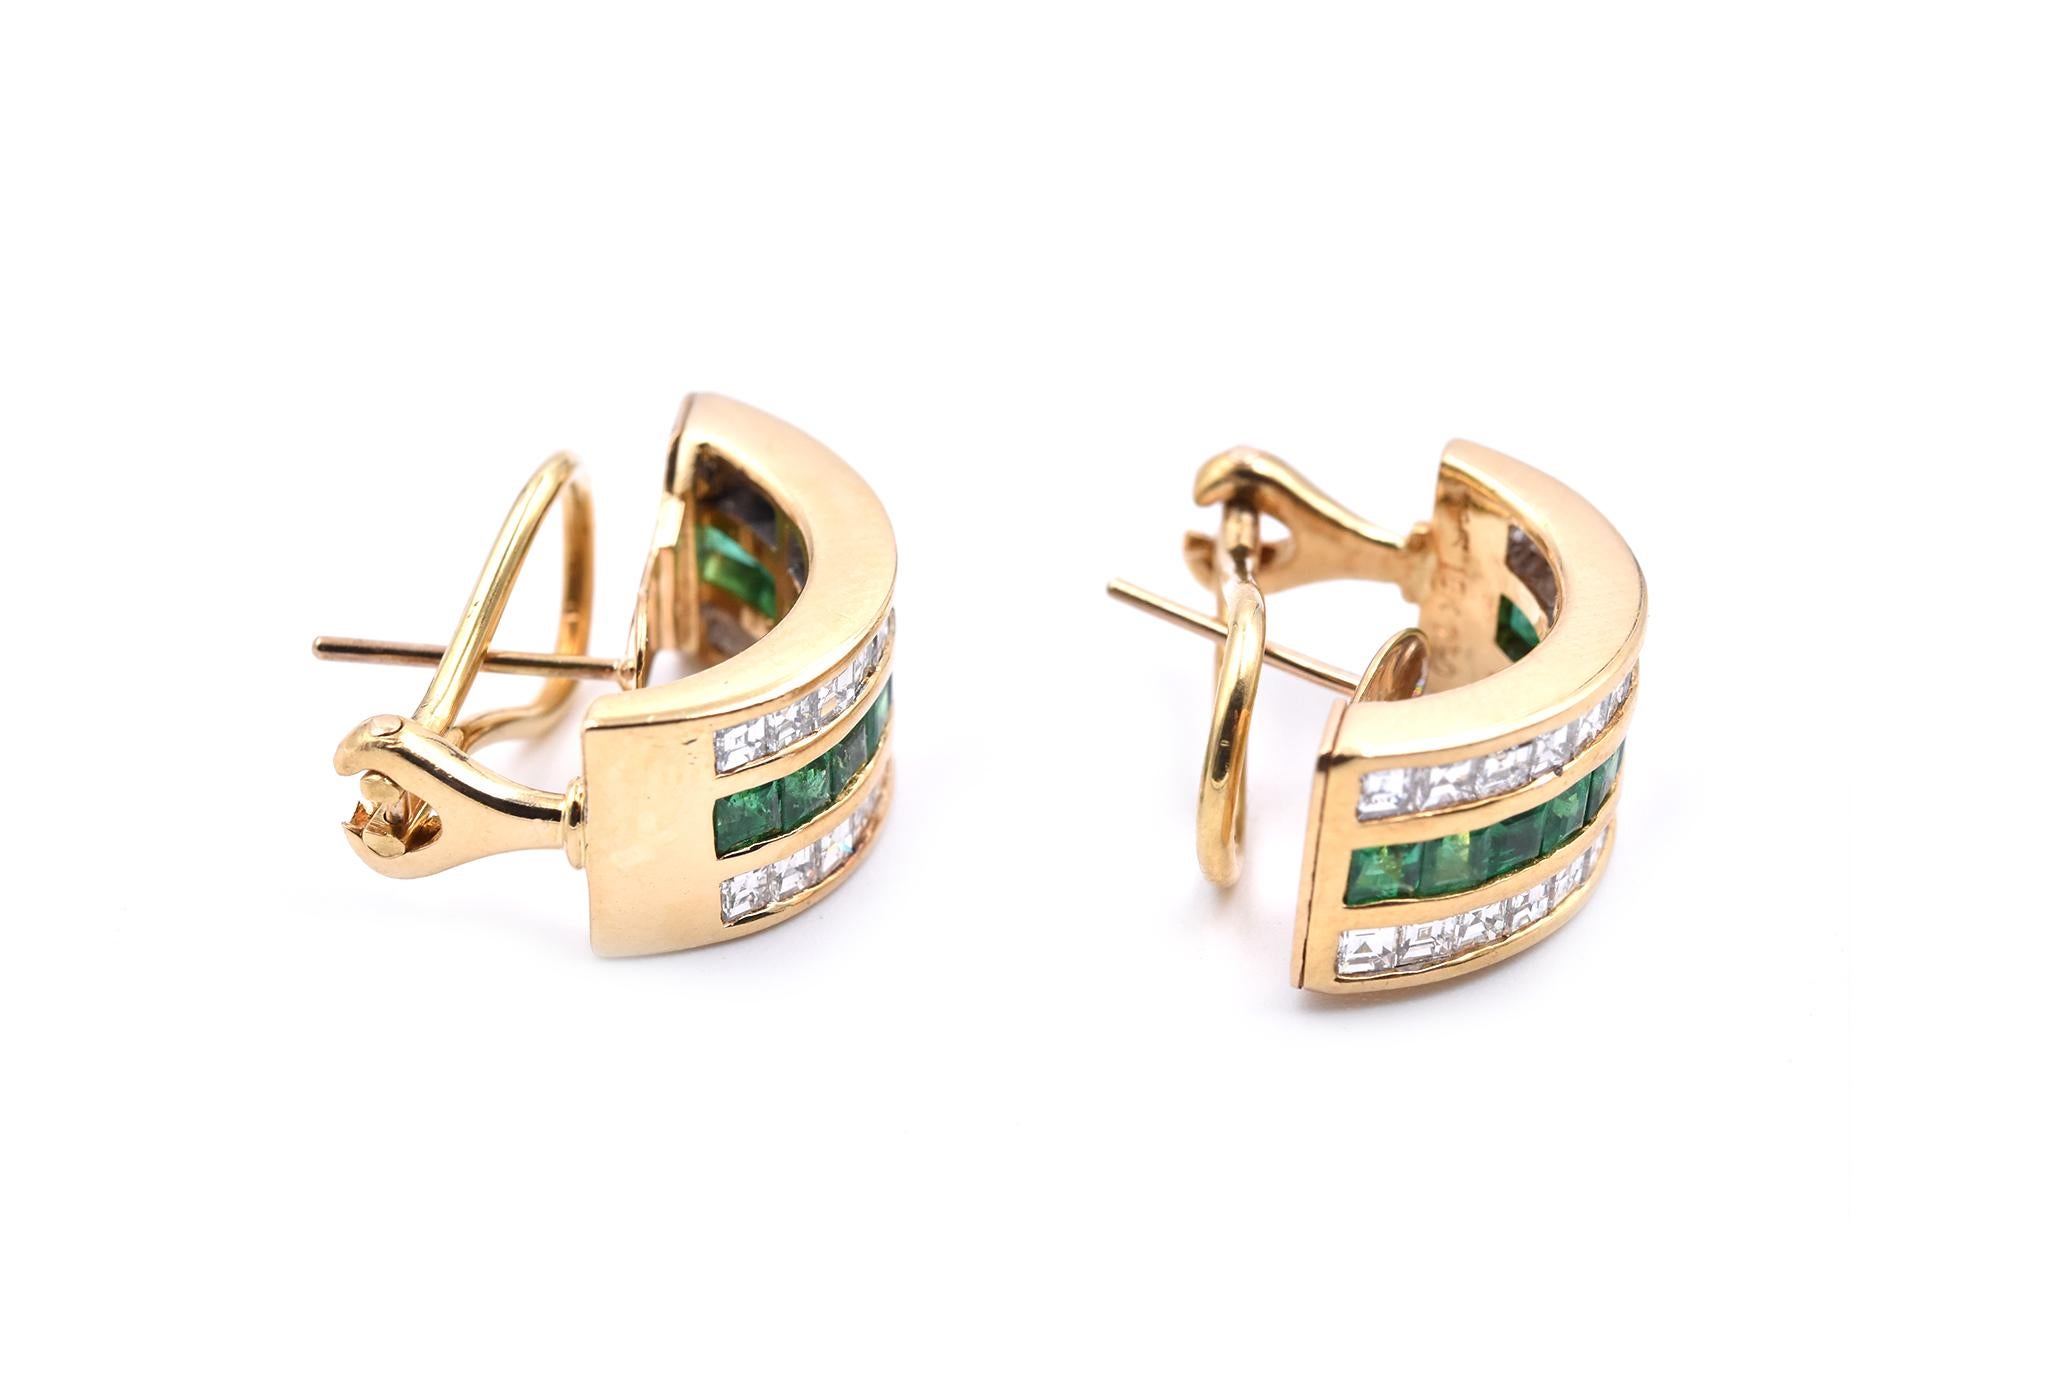 Designer: custom design
Material: 18k yellow gold
Emerald: square step cut= .75cttw
Diamonds: square cut= 1.76cttw
Color: G
Clarity: VS
Fastenings: post with Omega back
Dimensions: each earring is 8.90mm by 18.90mm
Weight: 11.78 grams
